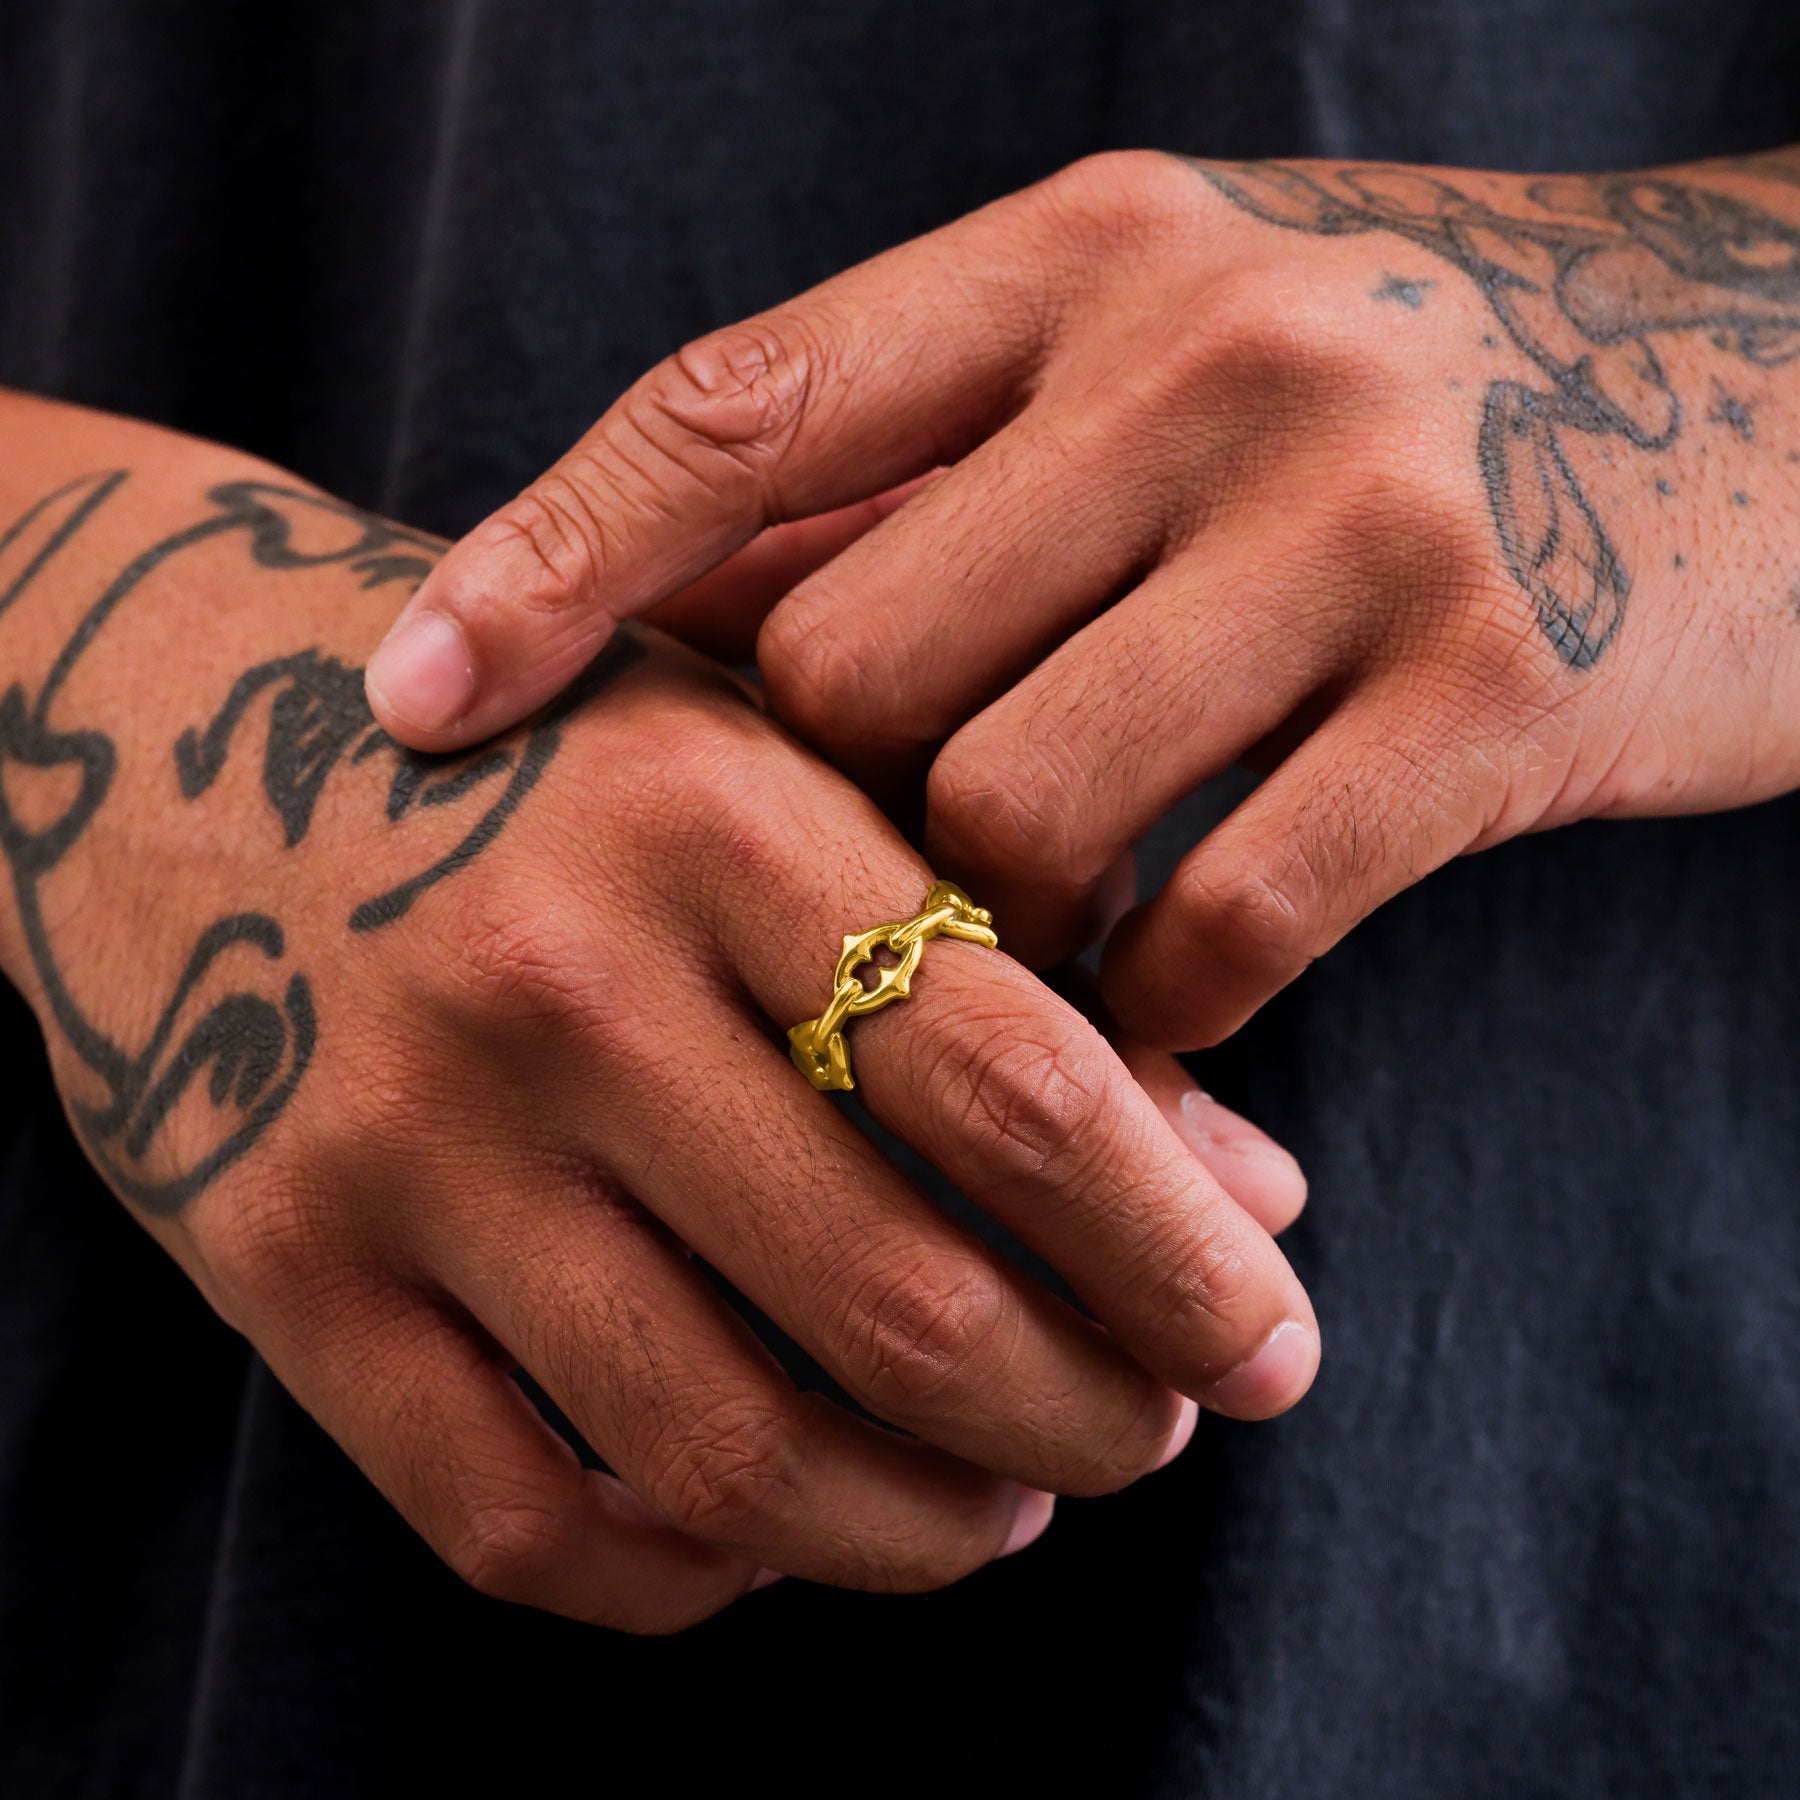 Statement Collective - "The Cathedral" Spiked Link Chain Ring (Gold)